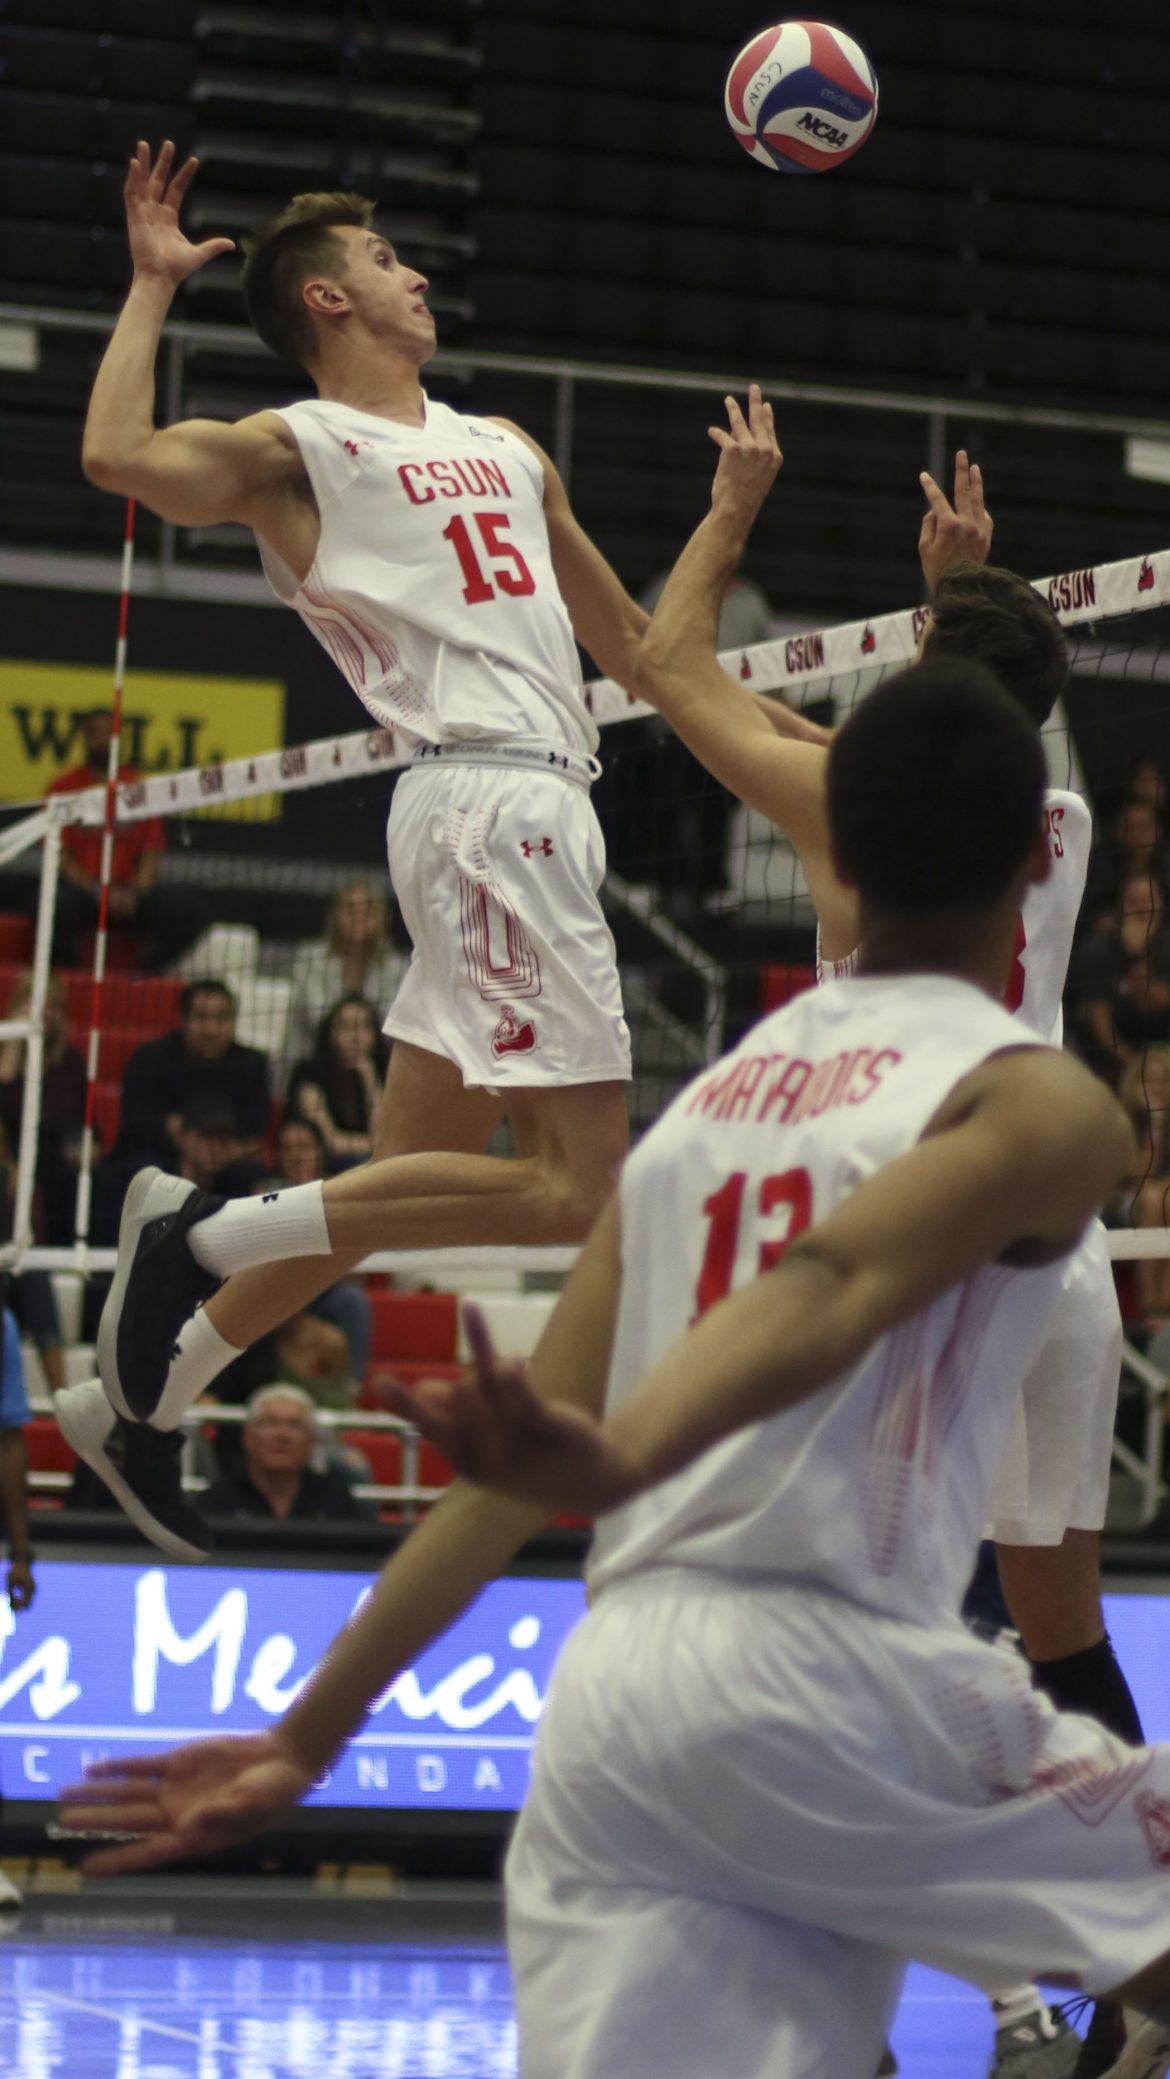 CSUN+mens+volleyball+dressed+in+white+goes+to+spike+the+ball